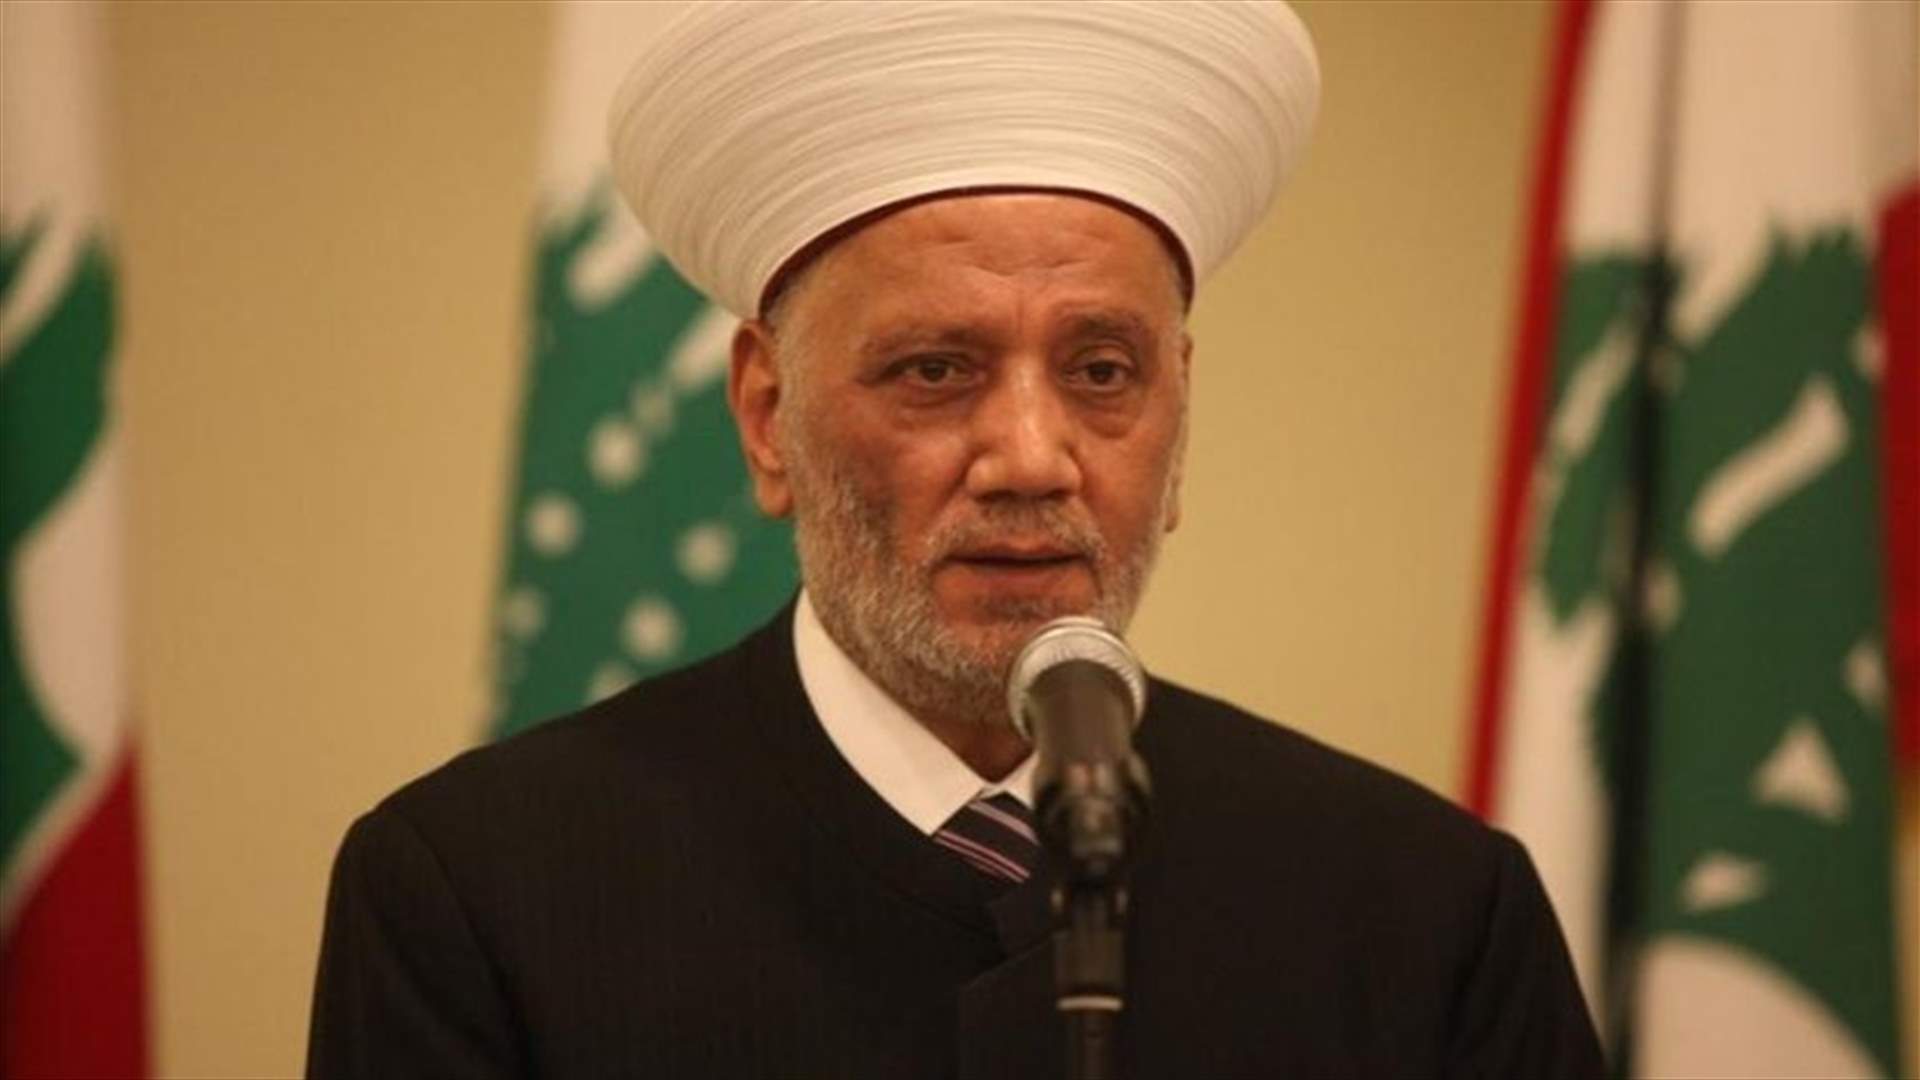 Grand Mufti Derian hopes February 8 session would not have same fate of its predecessors